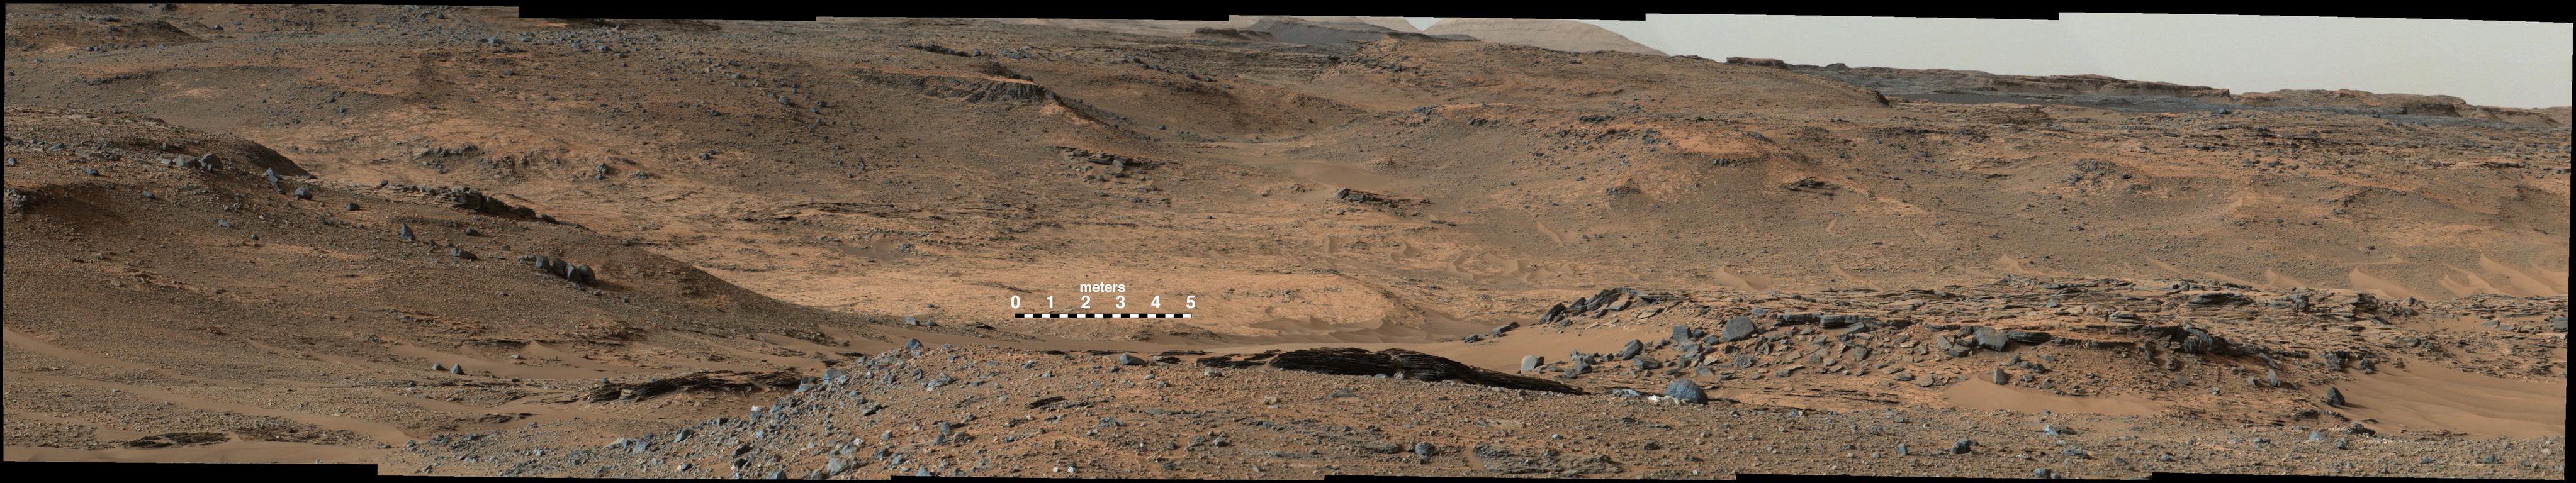 This image from NASA's Mars Curiosity rover shows the "Amargosa Valley," on the slopes leading up to Mount Sharp on Mars.